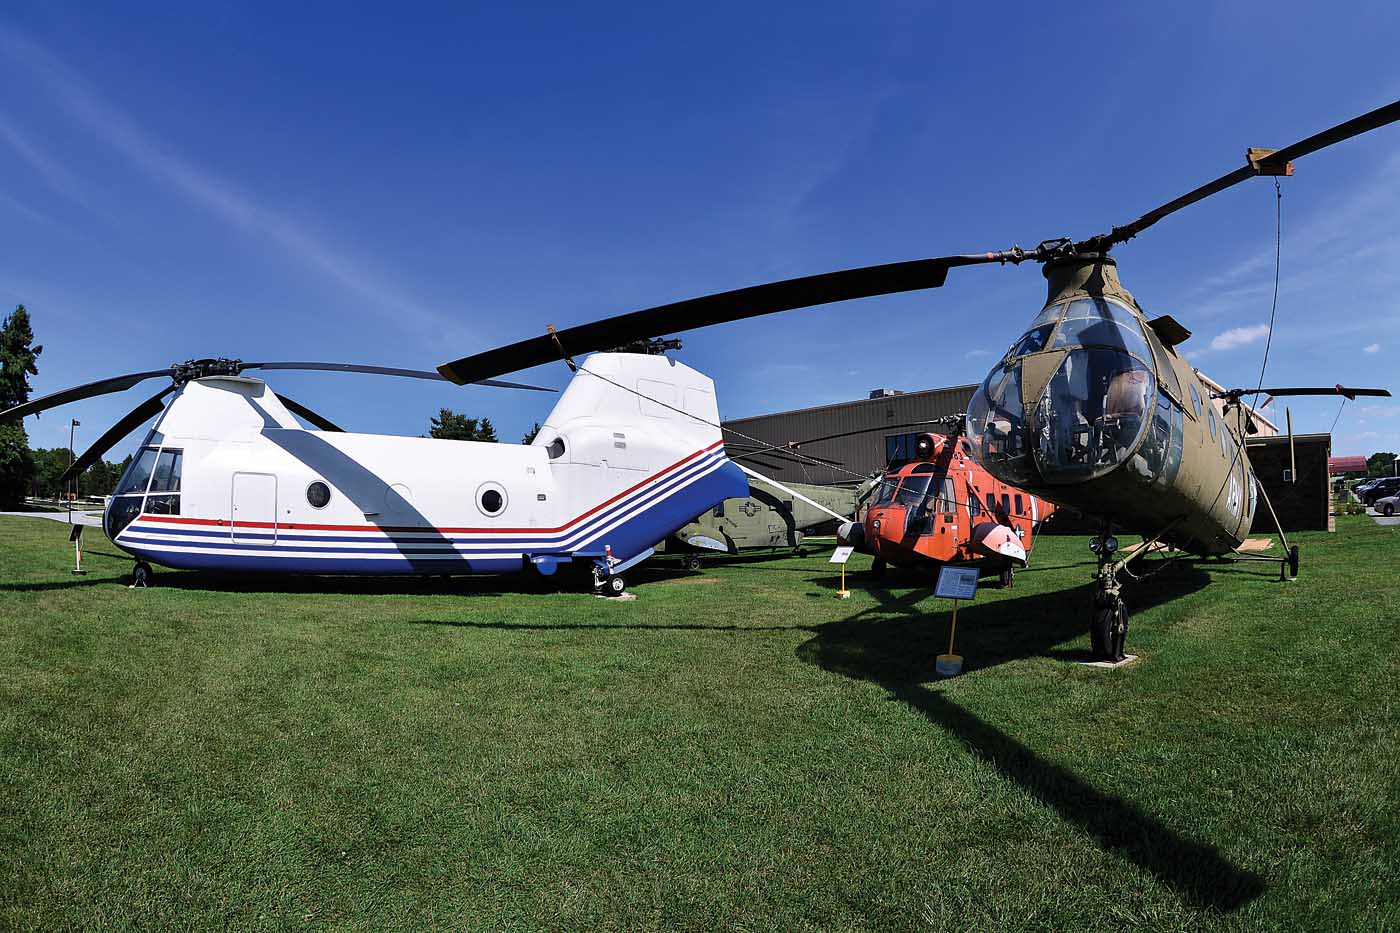 The American Helicopter Museum and Education Center has quite a collection of historic rotary-wing aircraft, including the Boeing Model 360, and its predecessor, the Vertol CH-21 Shawnee. Skip Robinson